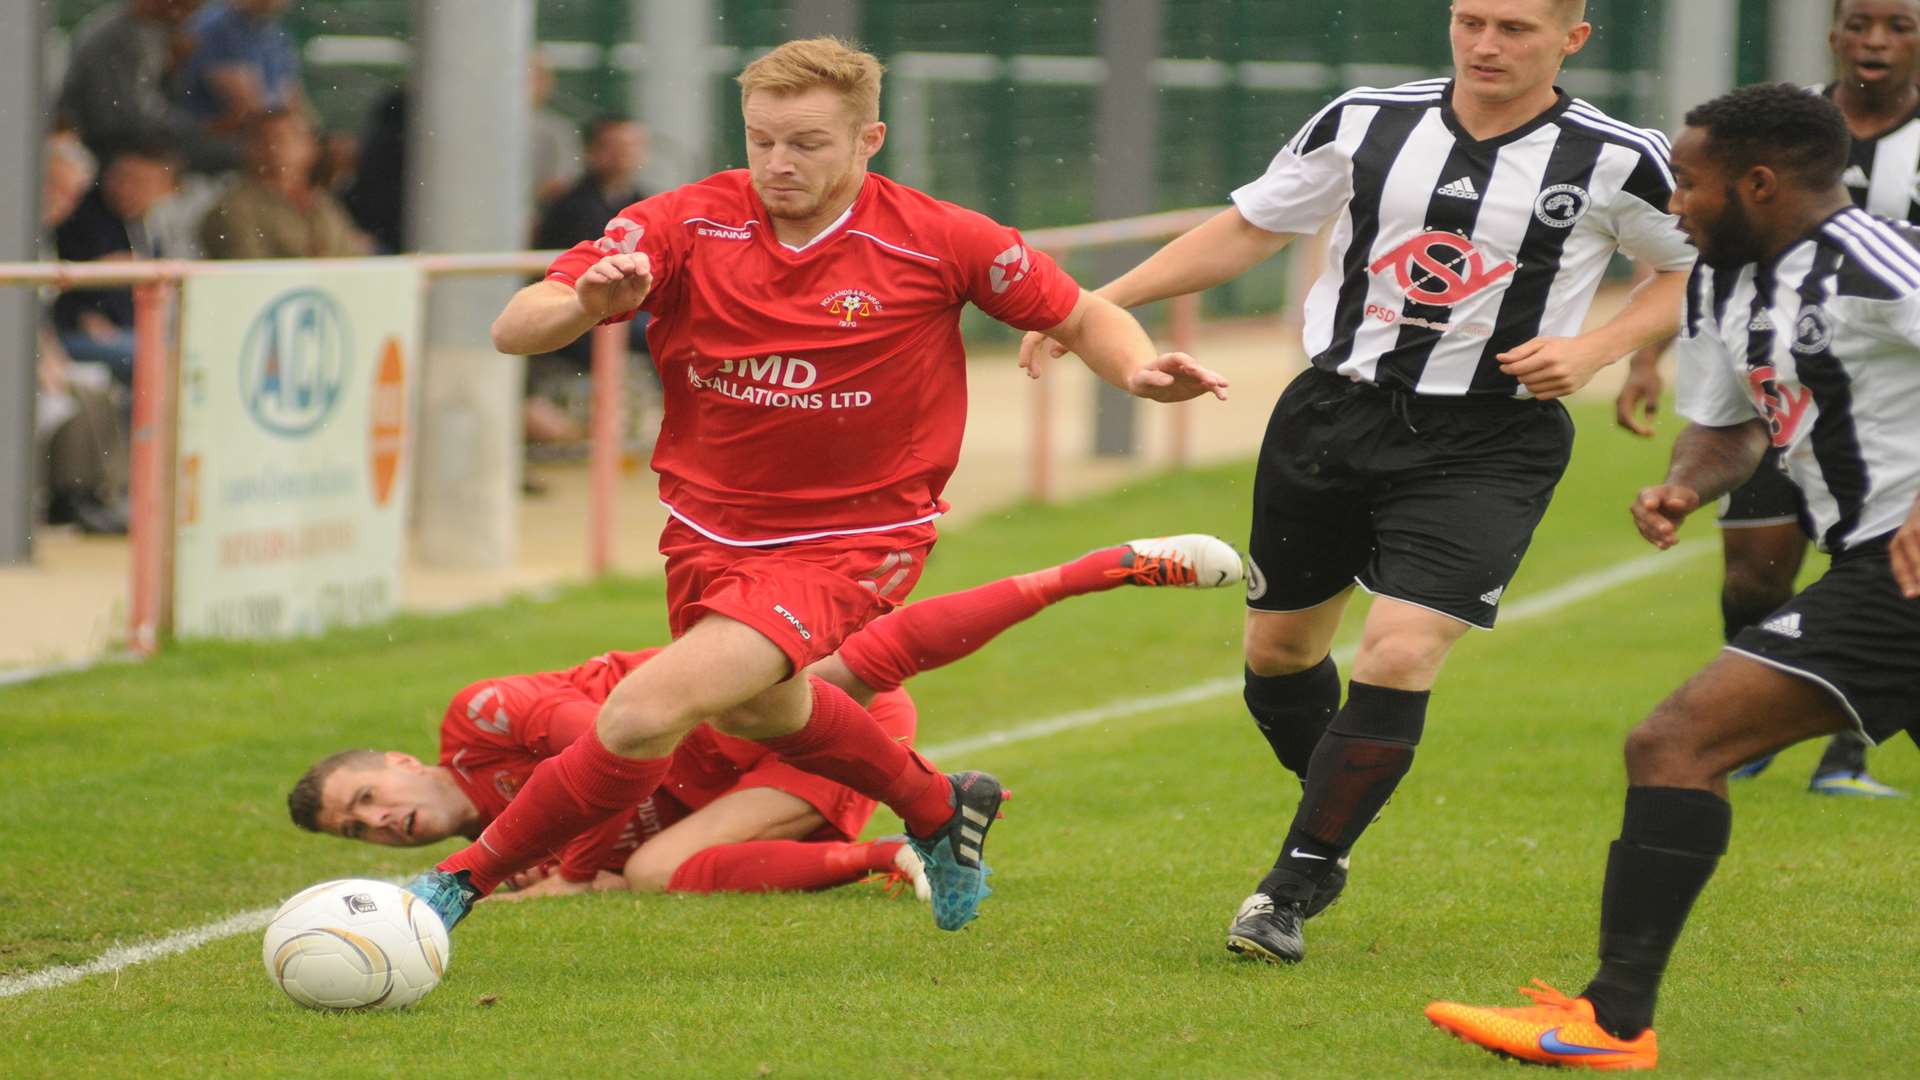 Sam Welch (left) has joined Hythe Town from Hollands & Blair Picture: Steve Crispe